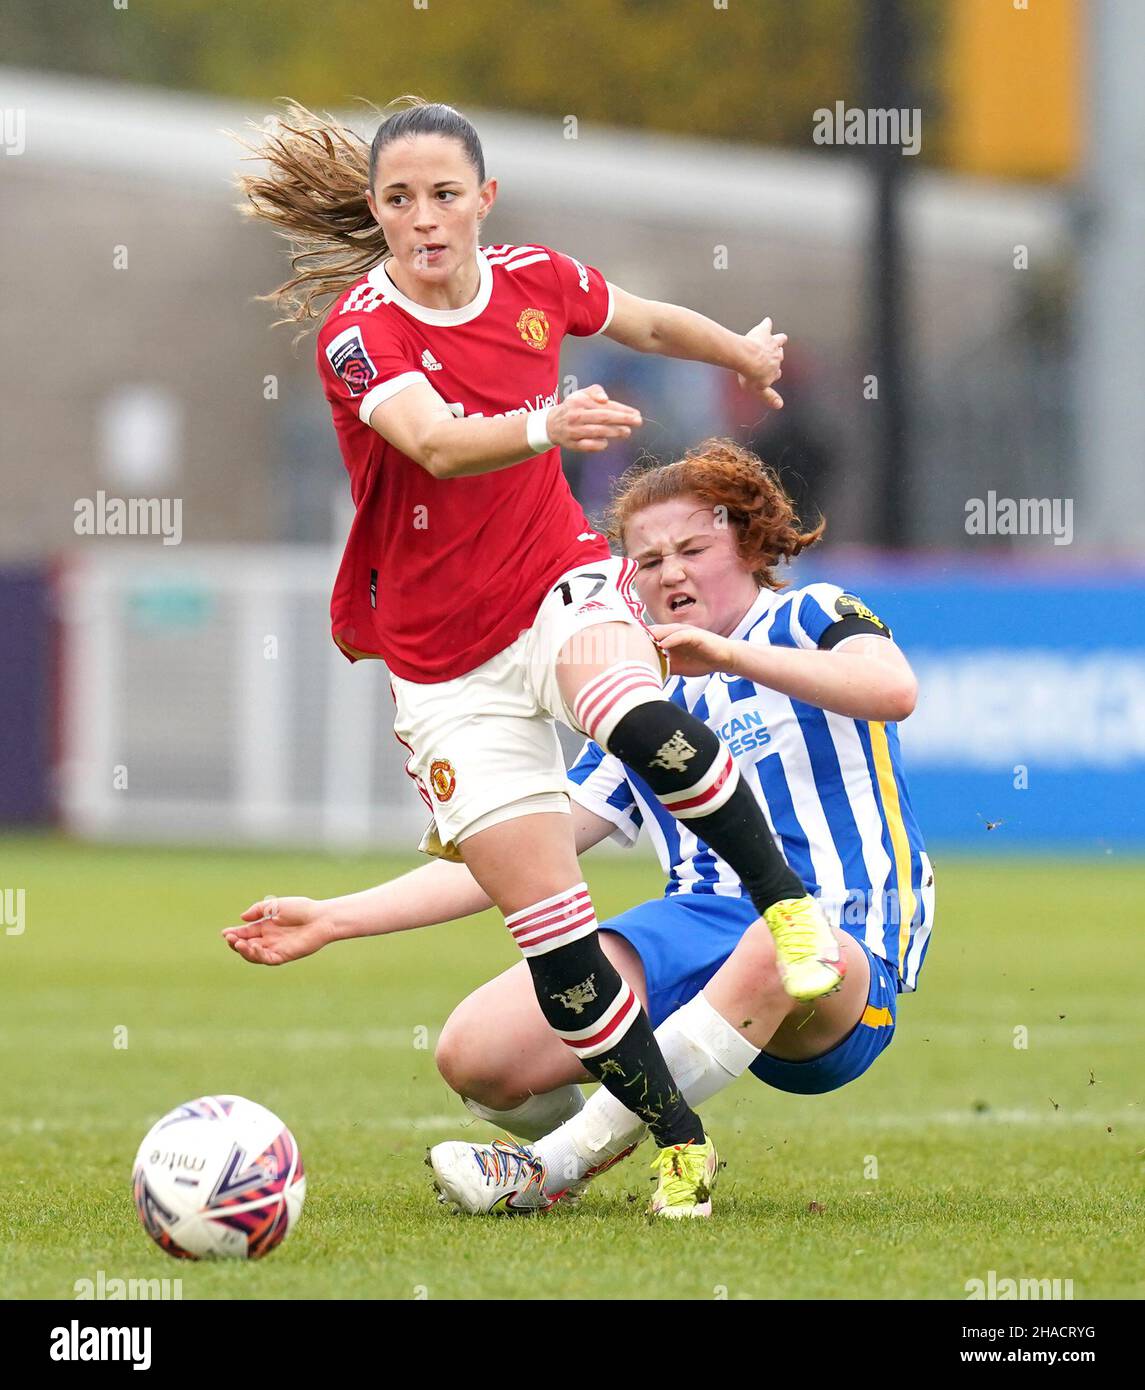 Manchester United's Ona Batlle (front) and Brighton and Hove Albion's Libby Bance battle for the ball during the Barclays FA Women's Super League match at The People's Pension Stadium, Brighton. Picture date: Sunday December 12, 2021. Stock Photo